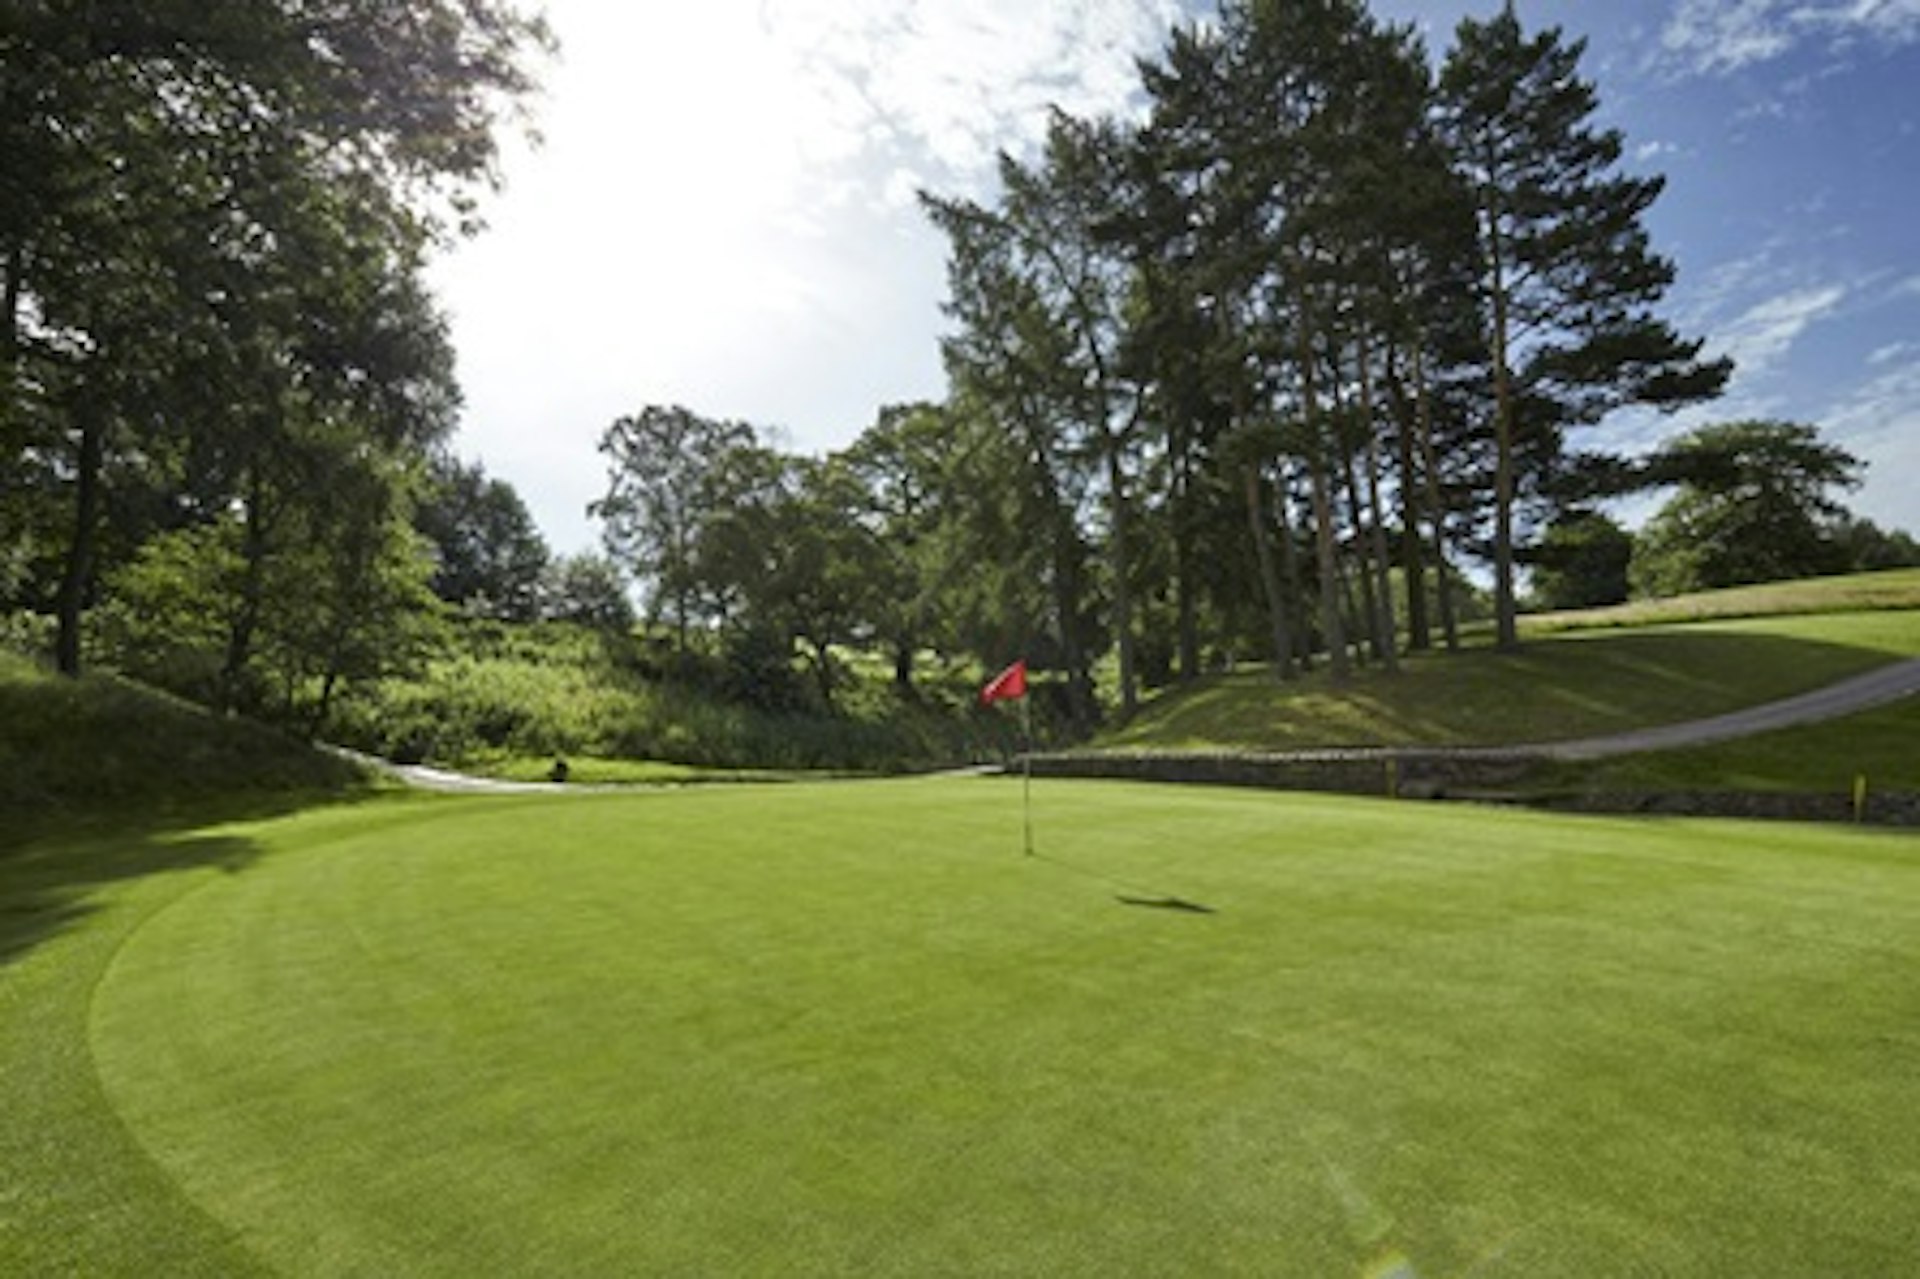 18 Hole Round of Golf for Two at The Shrigley Hall Hotel & Spa 3